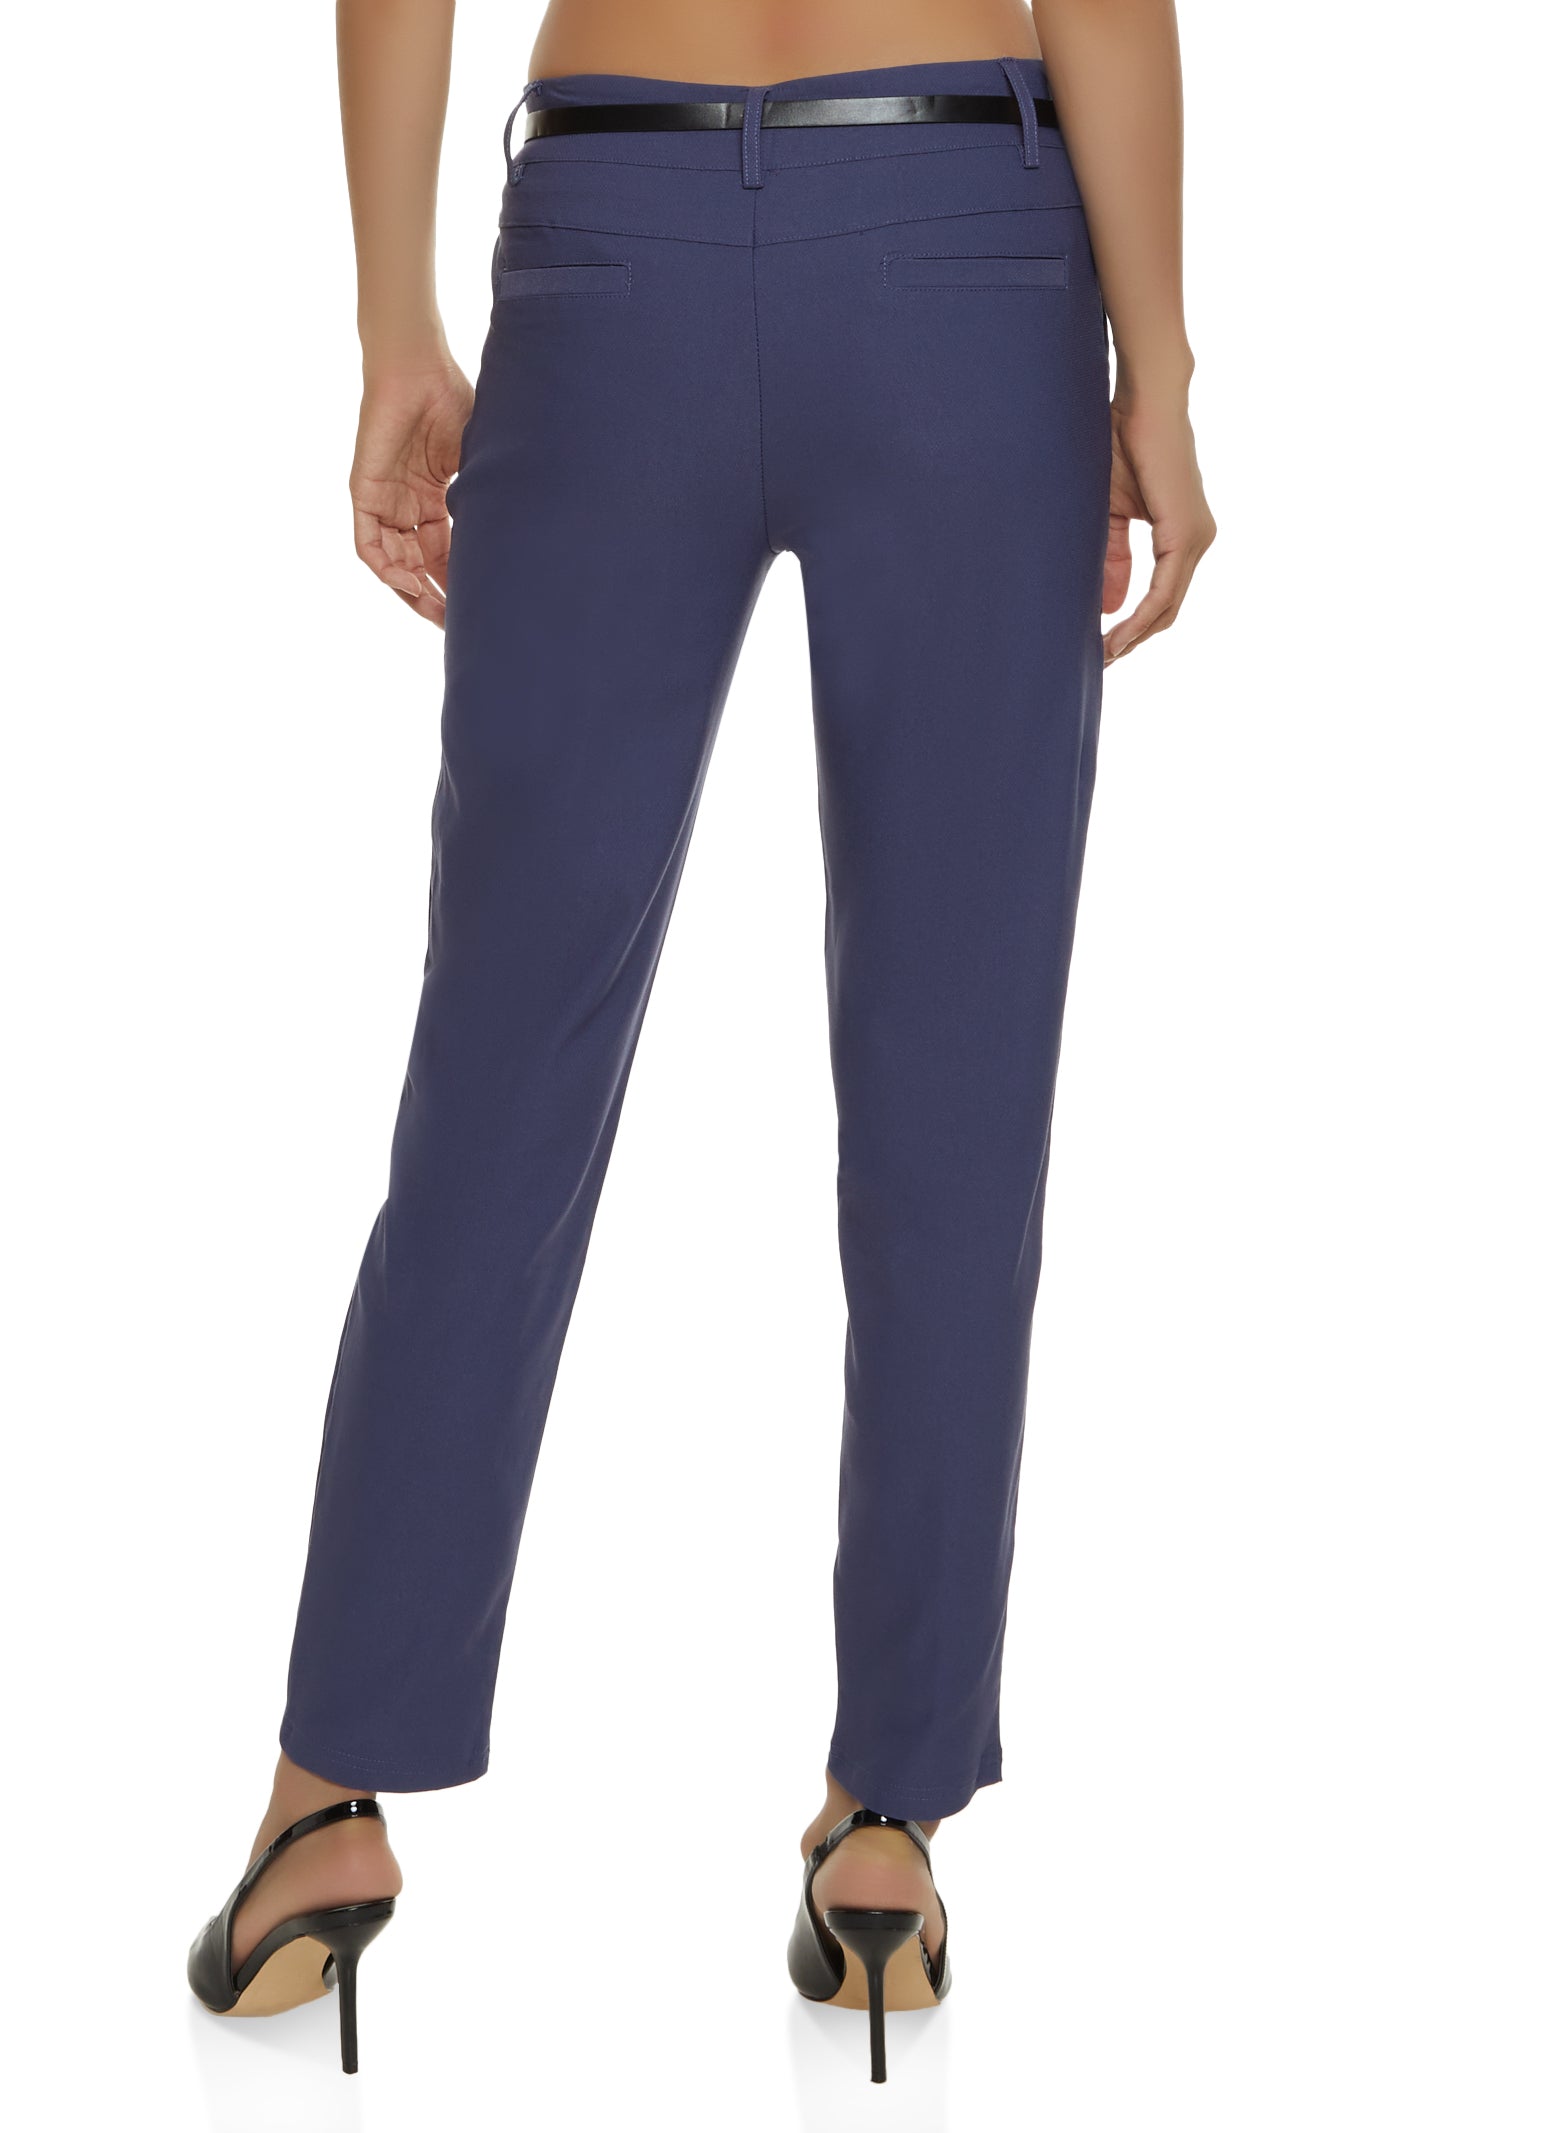 Twill Belted Ankle Dress Pants